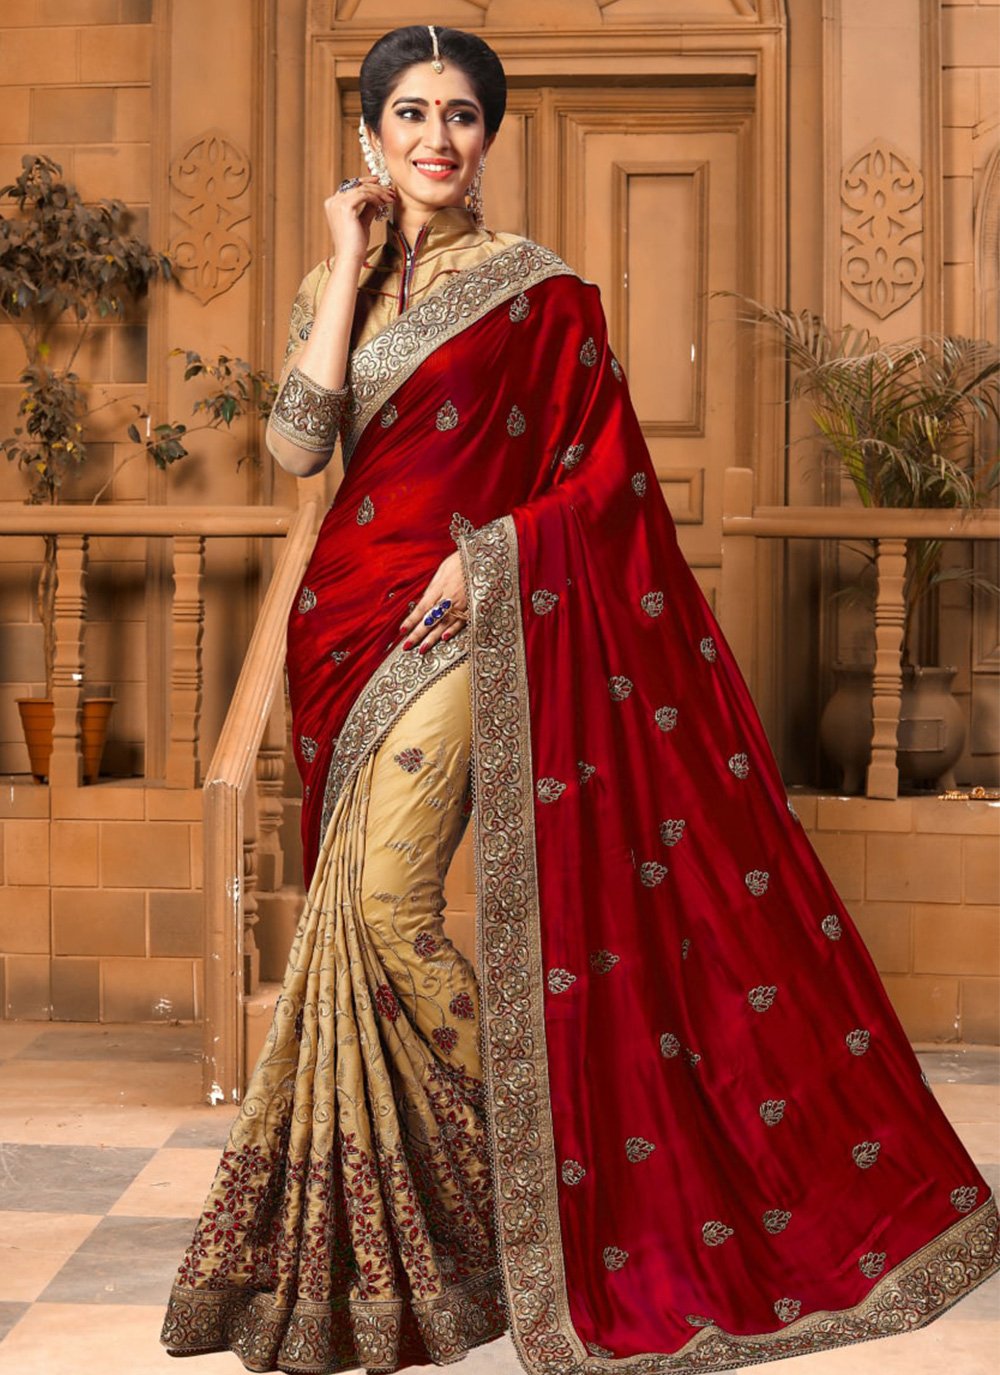 Beige and Red Border Ceremonial Shaded Saree